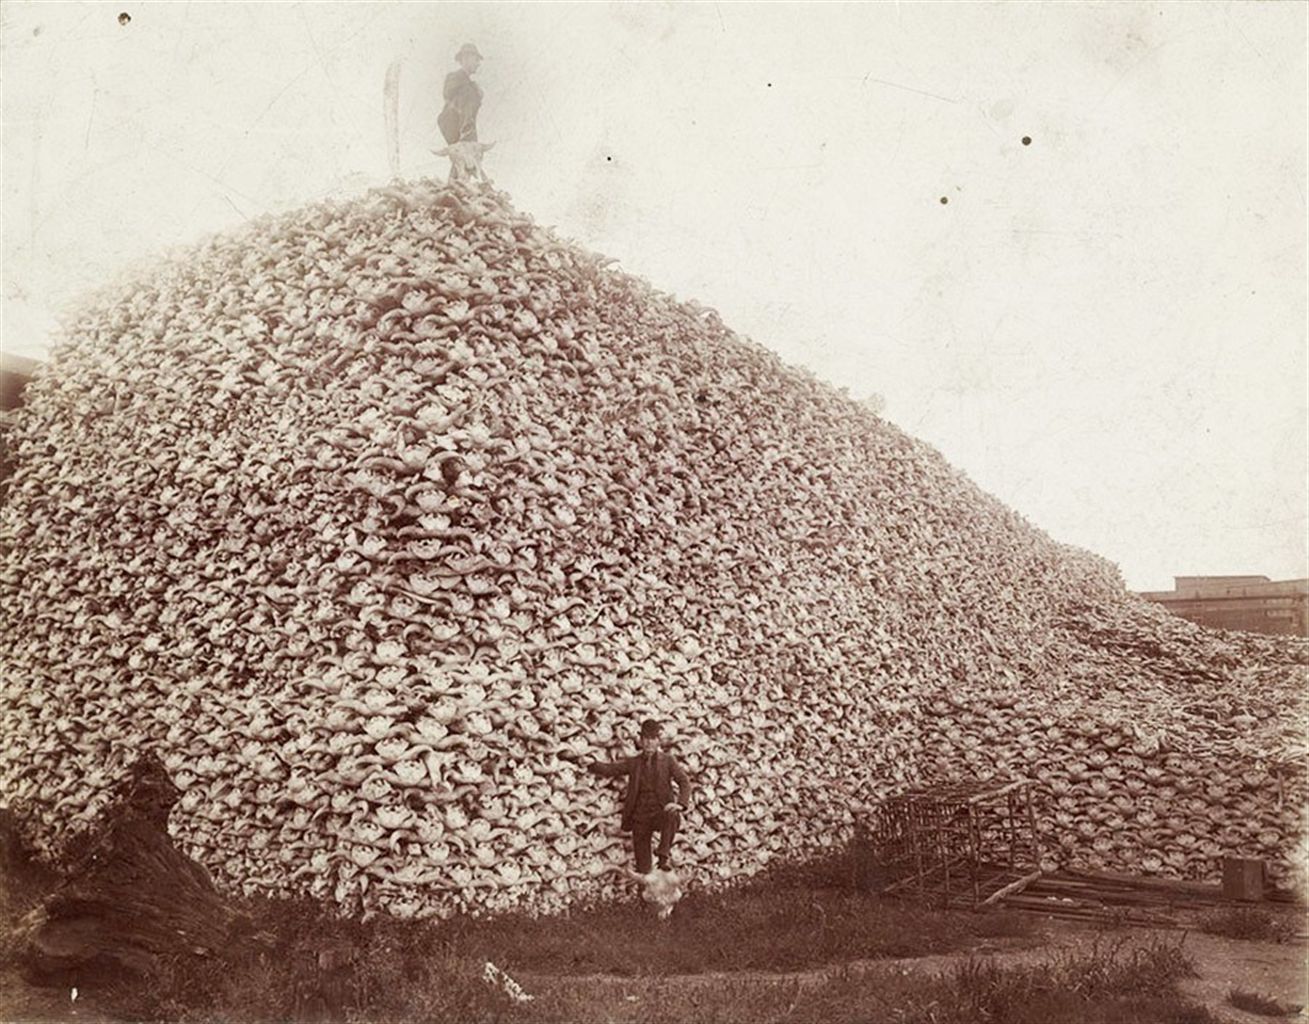 Buffaloes were nearly killed to extinction as part of a State-sponsored genocide of indigenous people. Buffalo was a major resource of these people for food and materials. Killing buffalo was akin to cutting off the supply line .During the 60-year period now known as “the Indian Wars,” from 1830-1890, the federal government massacred tens of thousands of Native peoples and “removed” surviving communities to isolated “reservations.” Entire ways of life and foodways were intentionally destroyed.